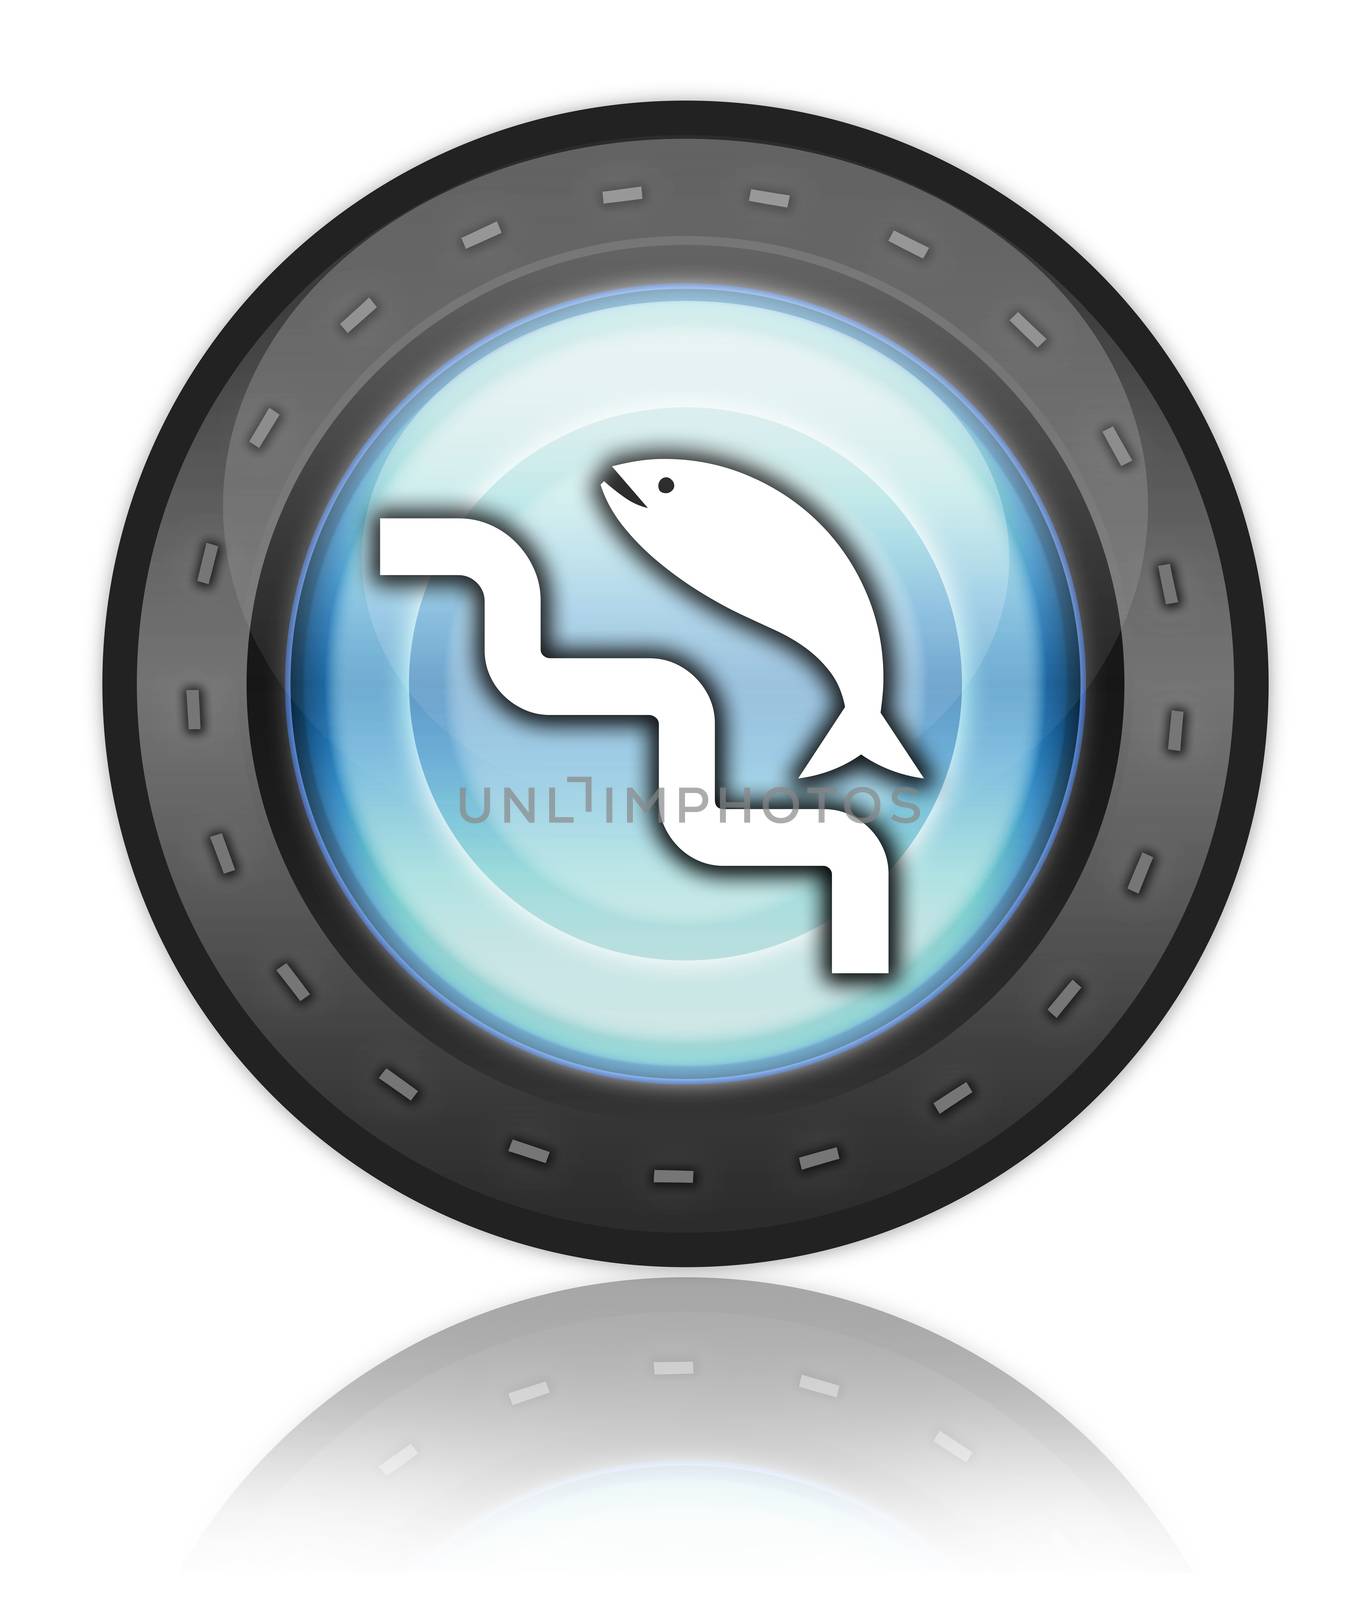 Icon, Button, Pictogram Fish Ladder by mindscanner